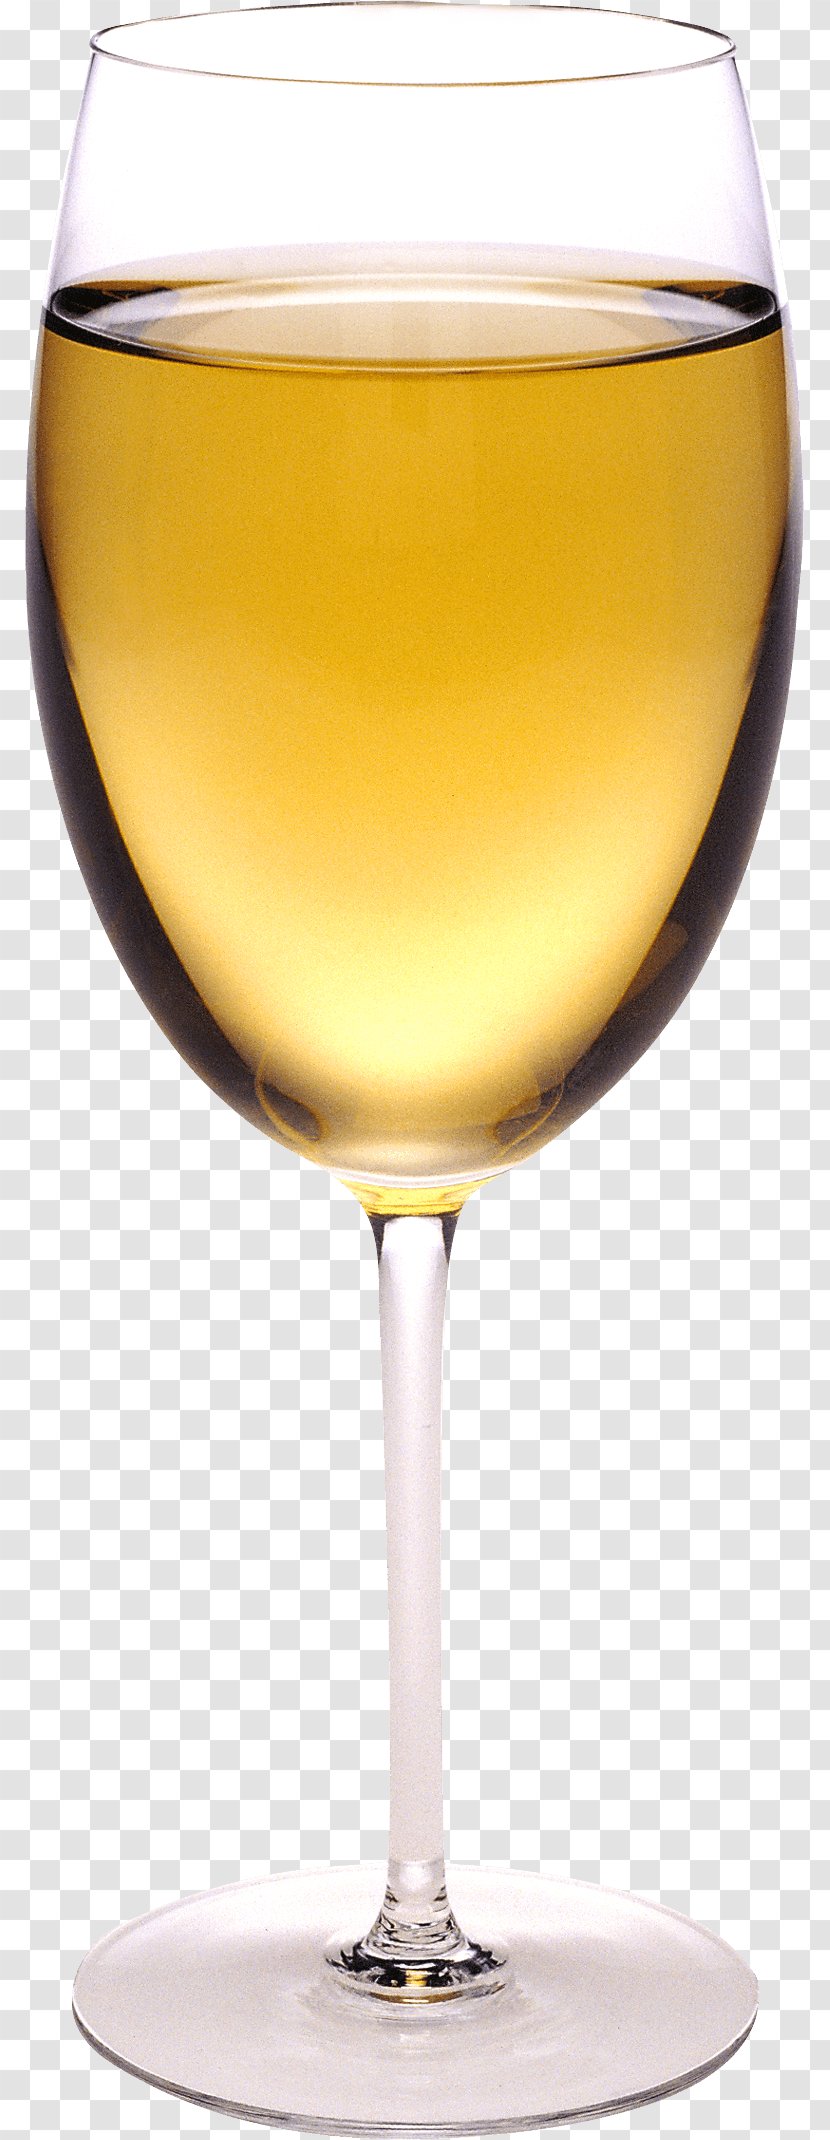 White Wine Champagne Cocktail - Drinkware - Glass Image Transparent PNG